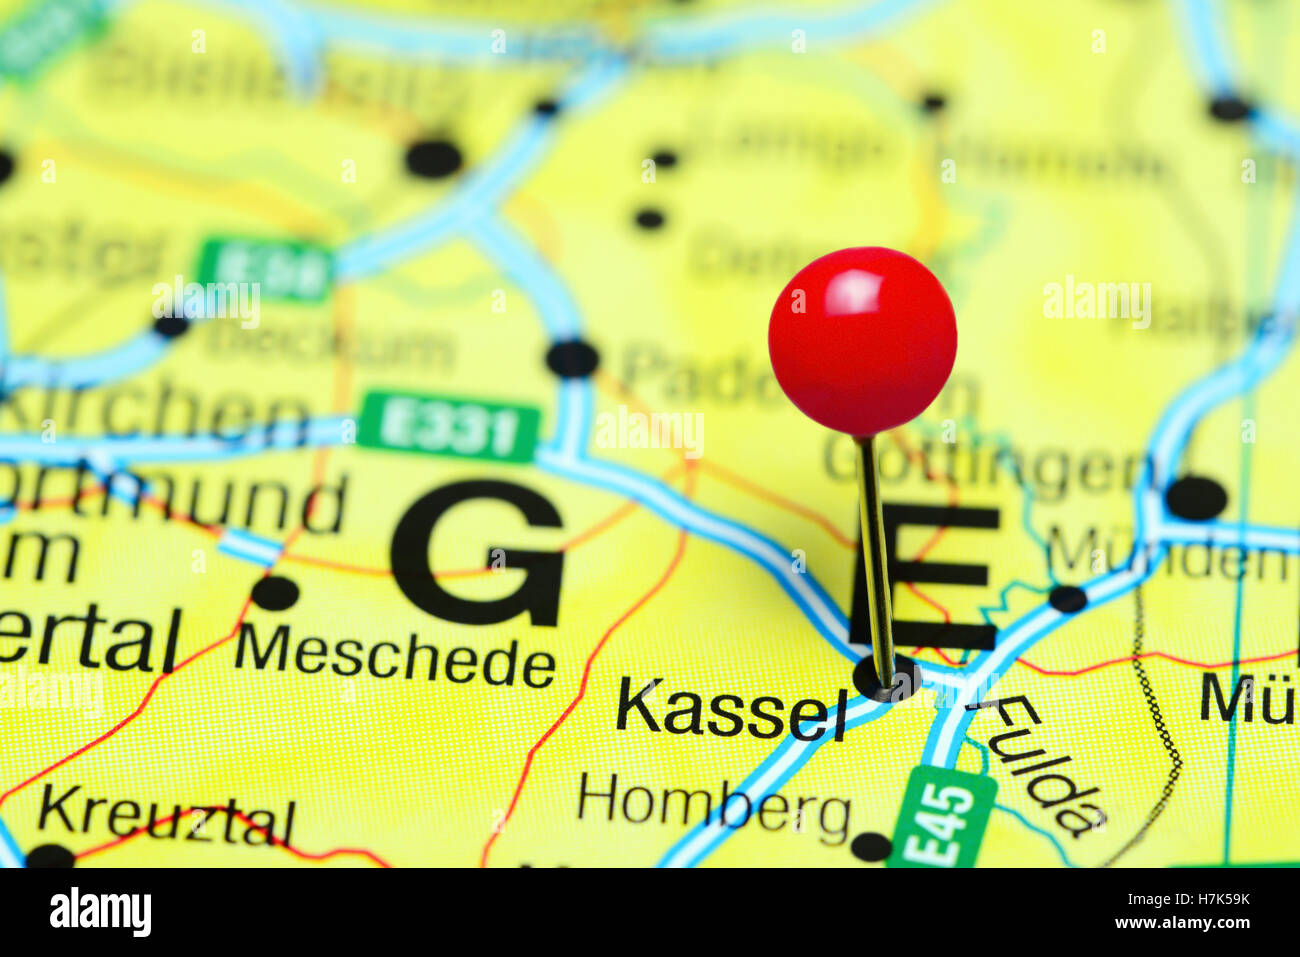 Kassel pinned on a map of Germany Stock Photo